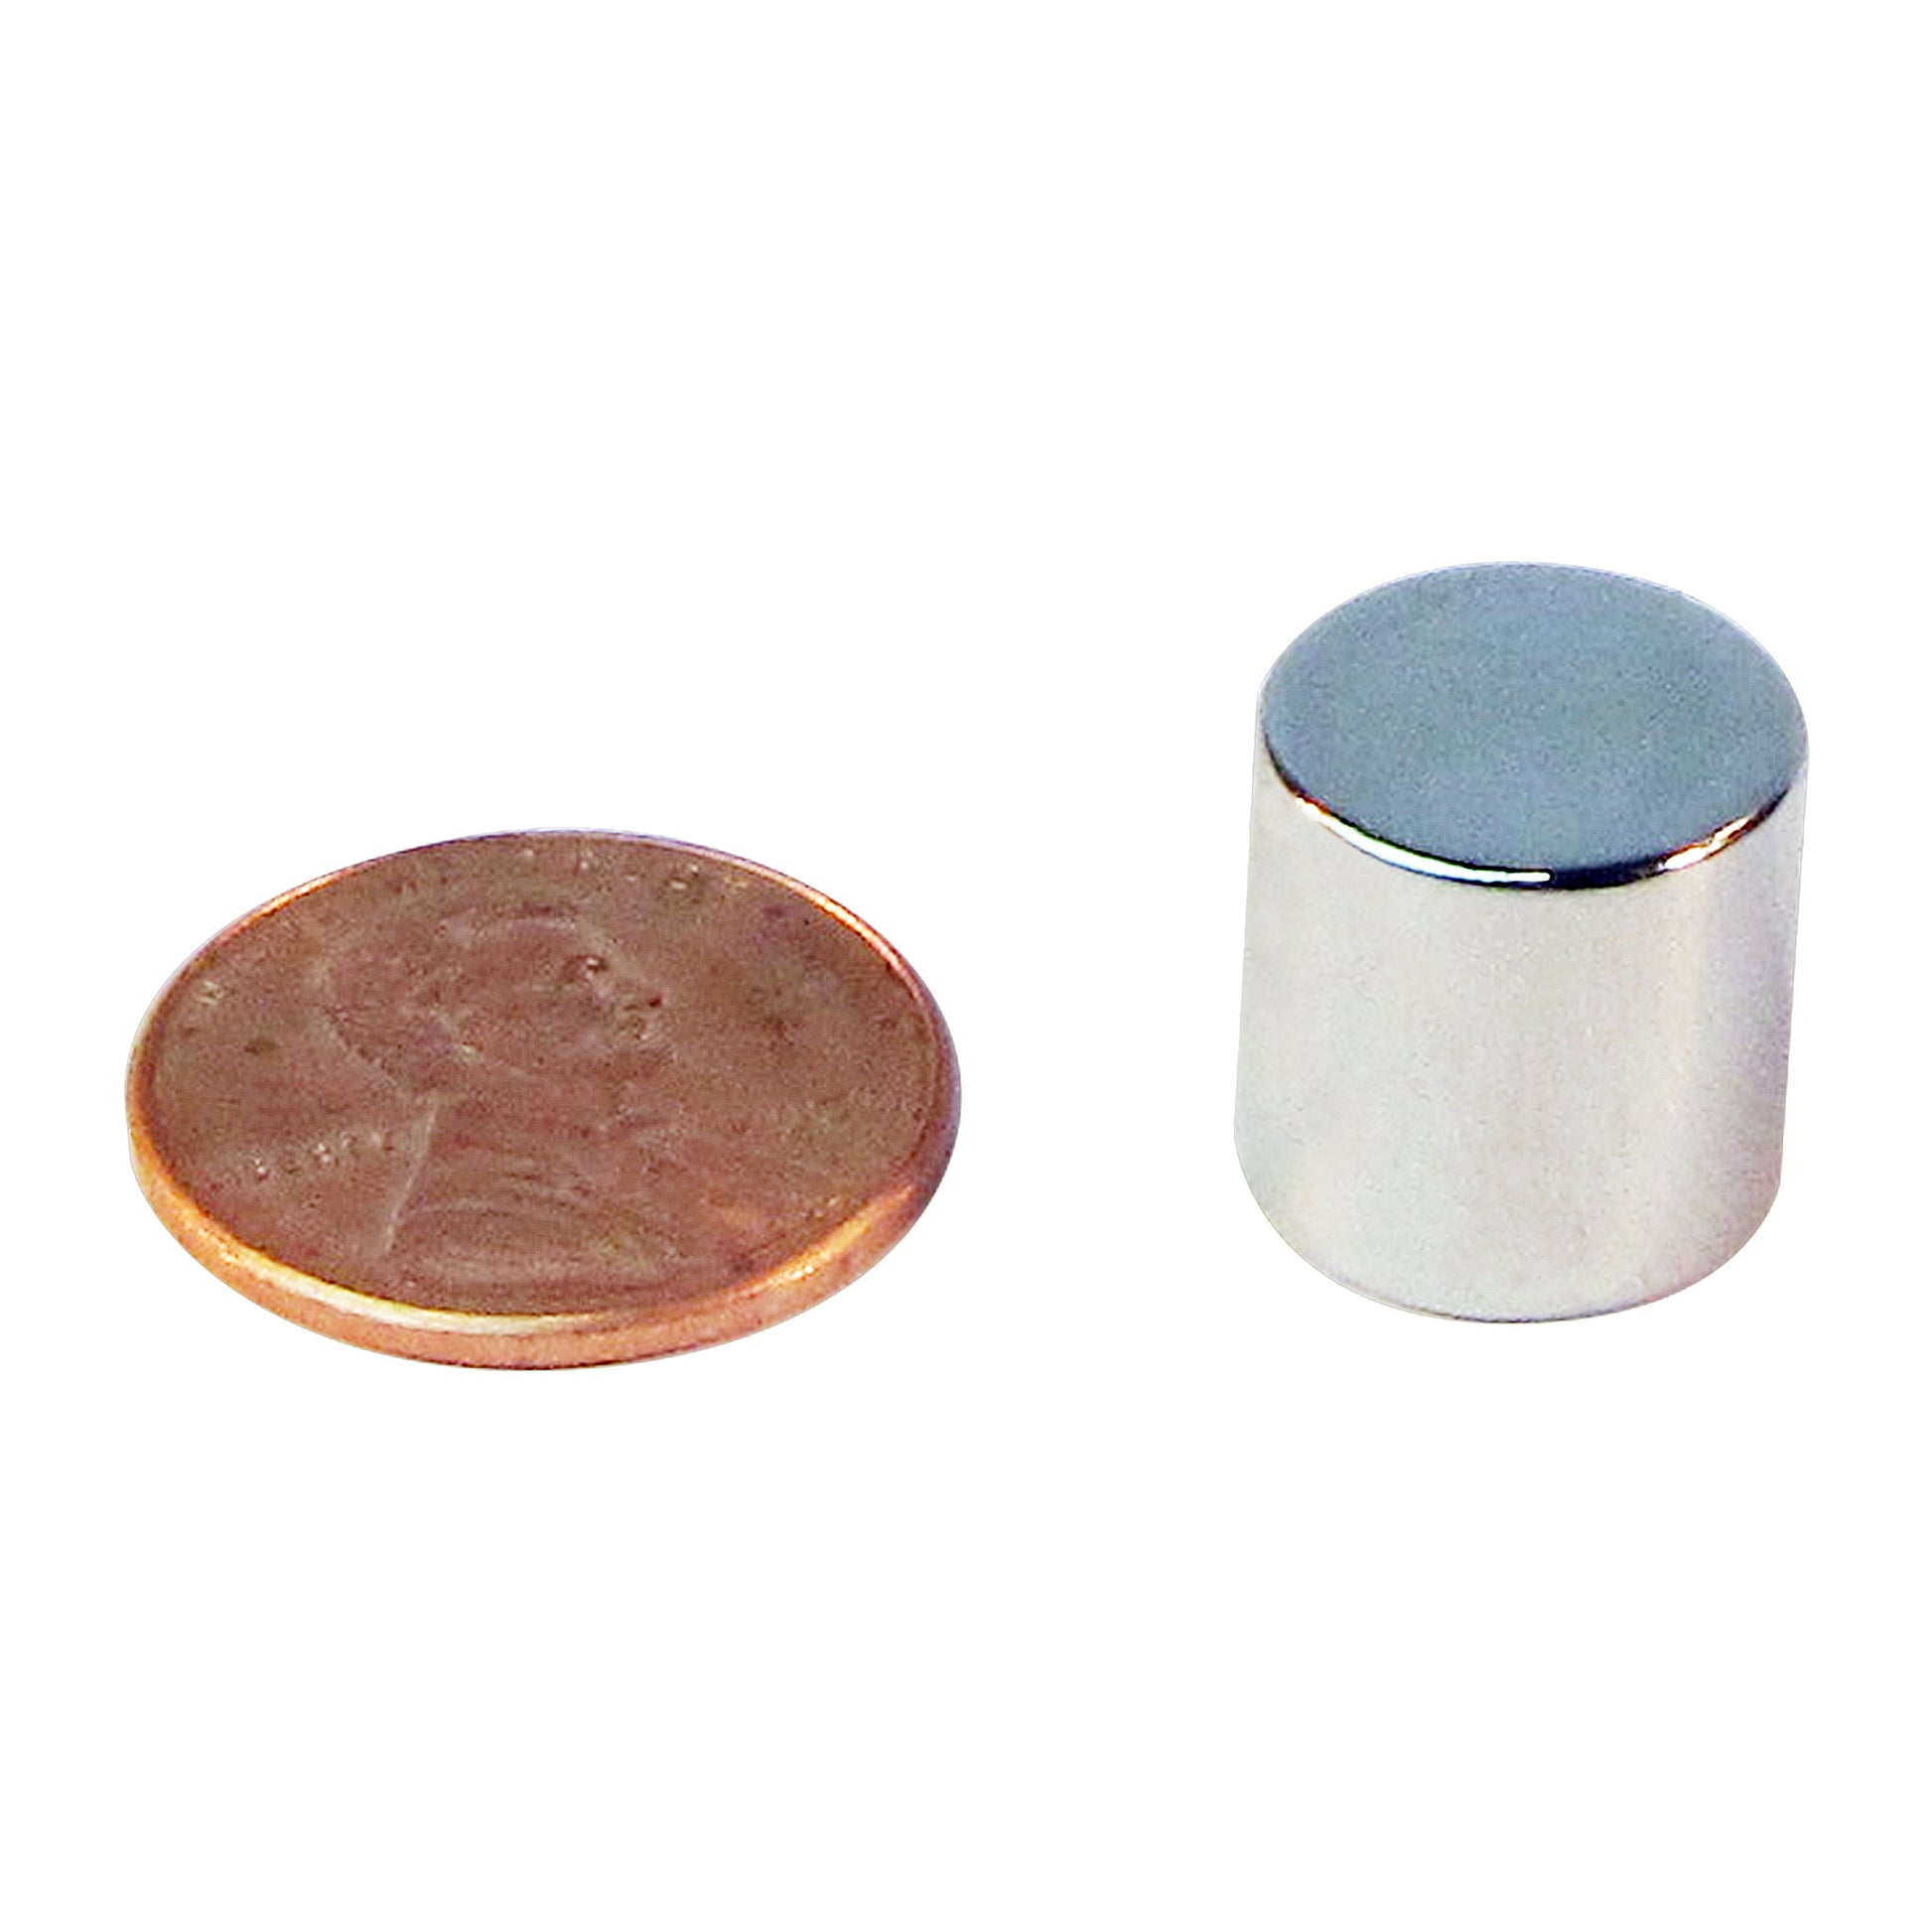 Load image into Gallery viewer, ND45-5050N Neodymium Disc Magnet - Compared to Penny for Size Reference